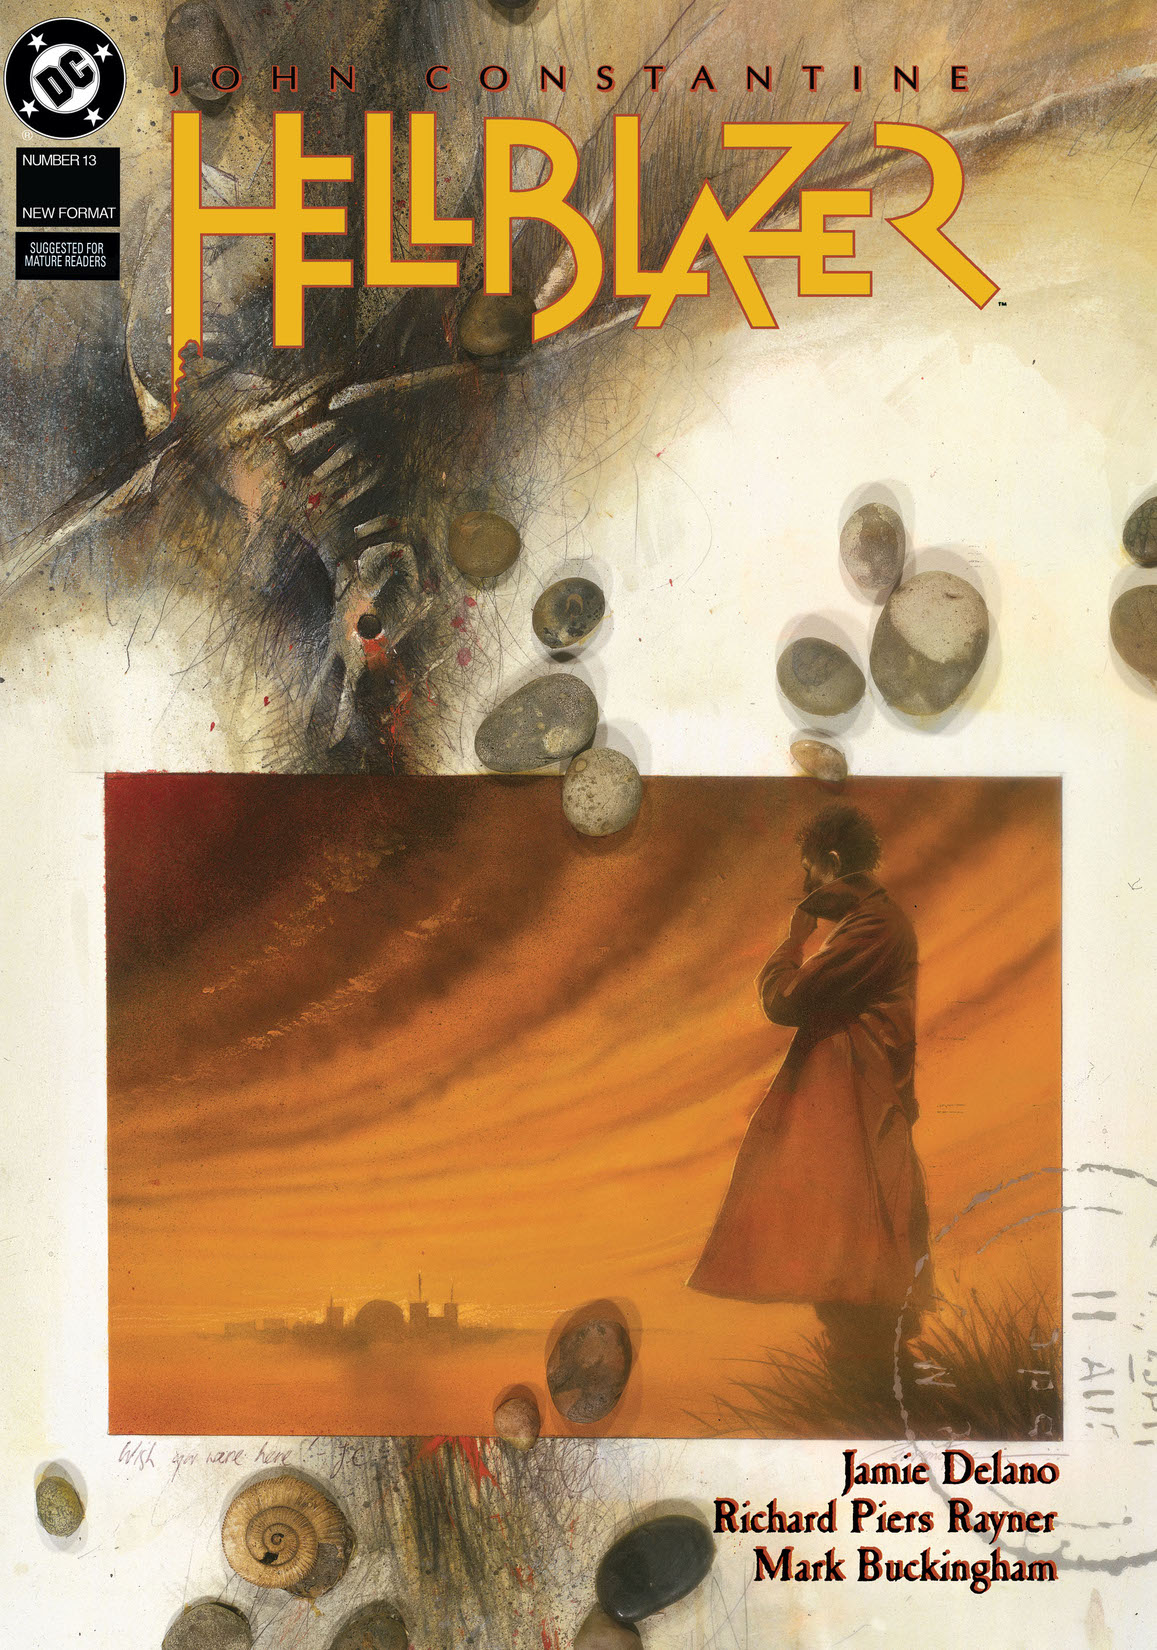 Hellblazer #13 preview images